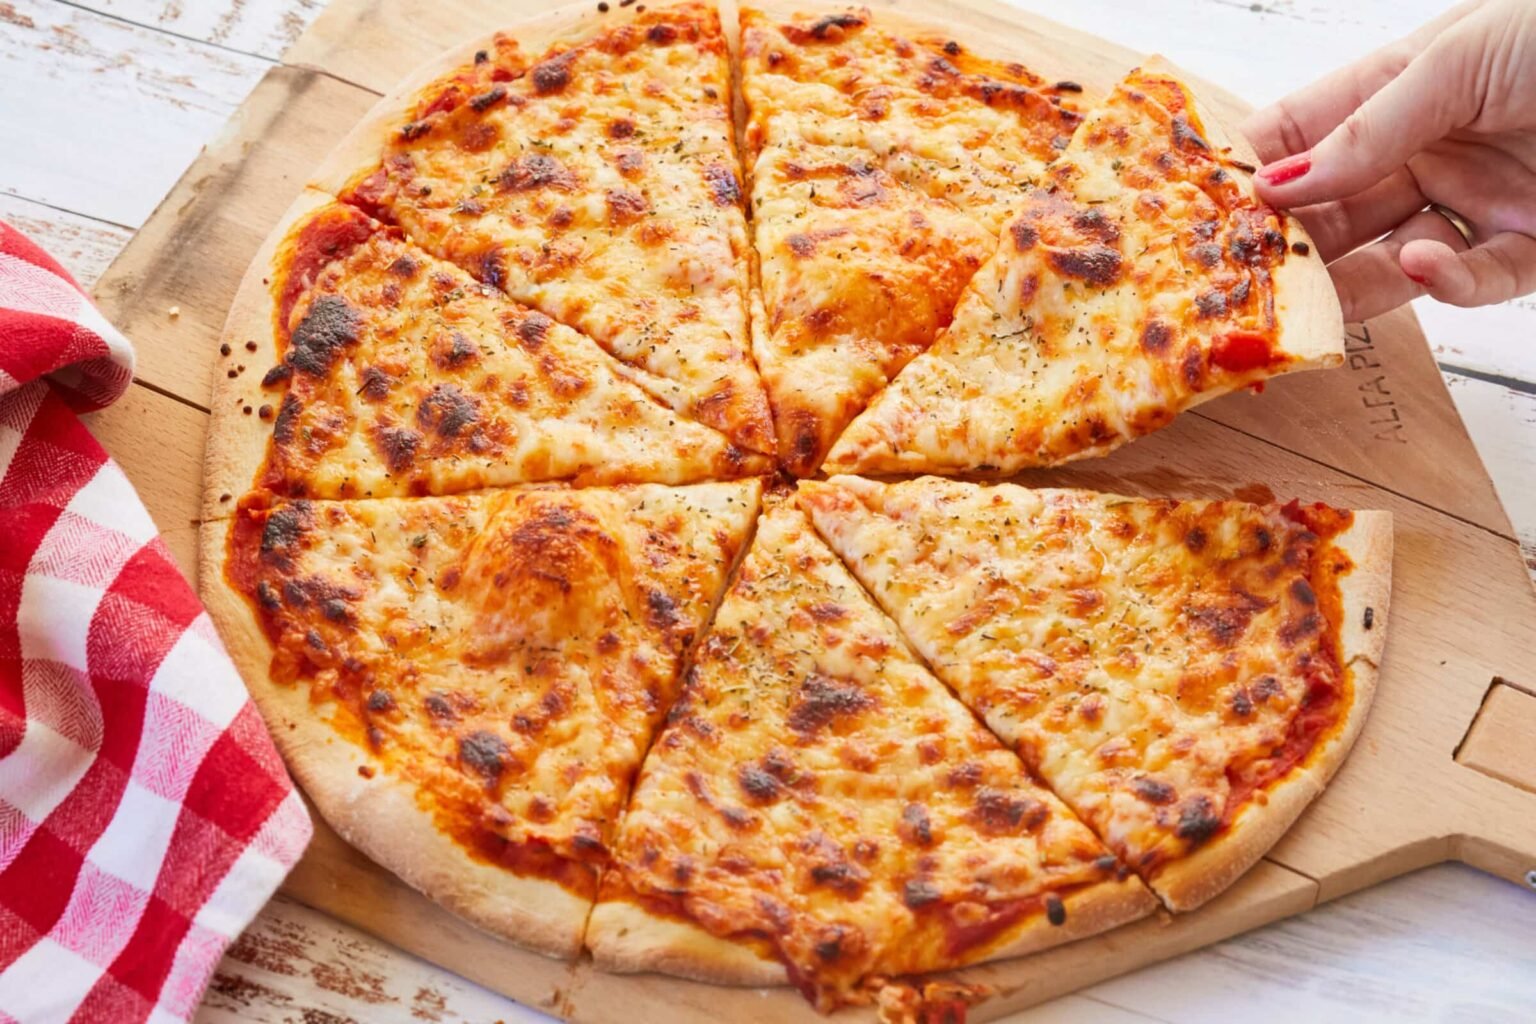 Italian immigrants introduced gooey cheese and a delicious sauce to the U.S. nation. Learn why New York's one dollar pizza may not be so cheap much longer!